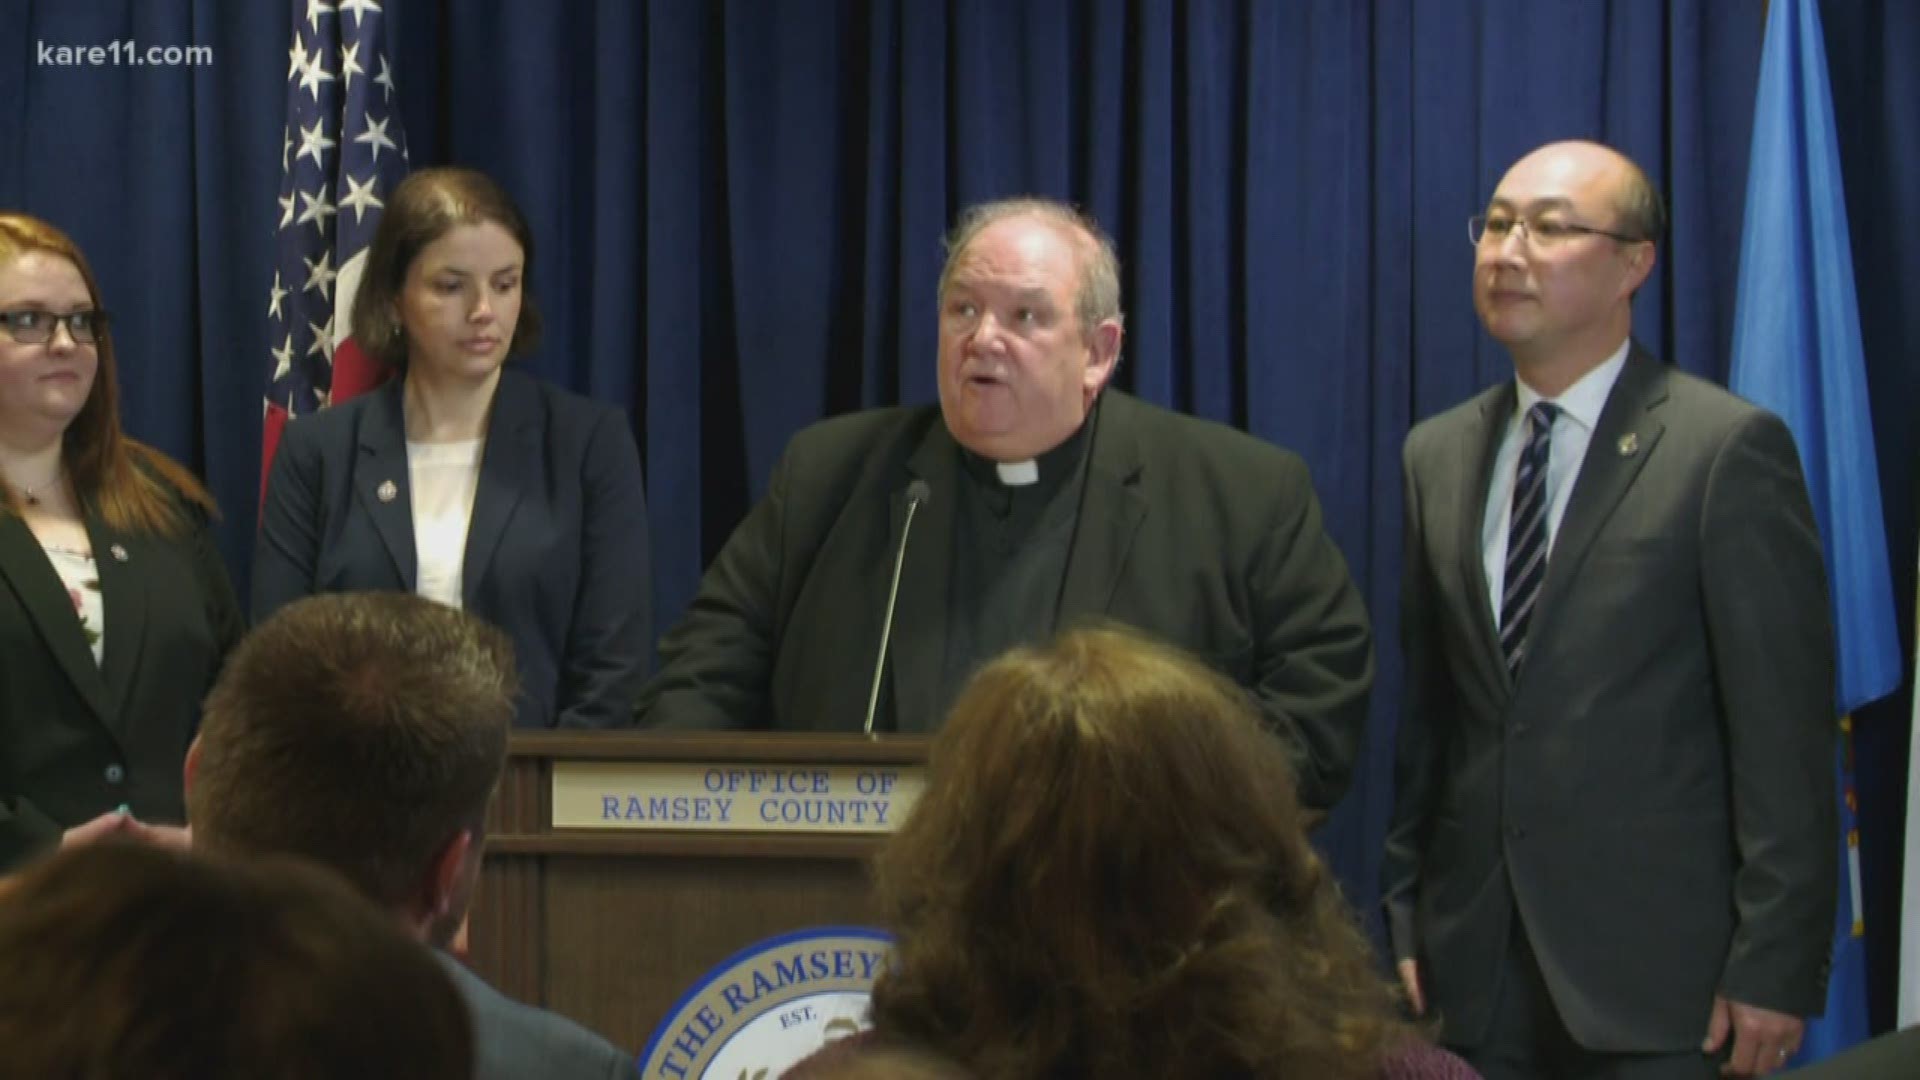 The judge is satisfied that the Archdiocese of St. Paul-Minneapolis has implemented changes under monitoring by Ramsey County to prevent child sex abuse.